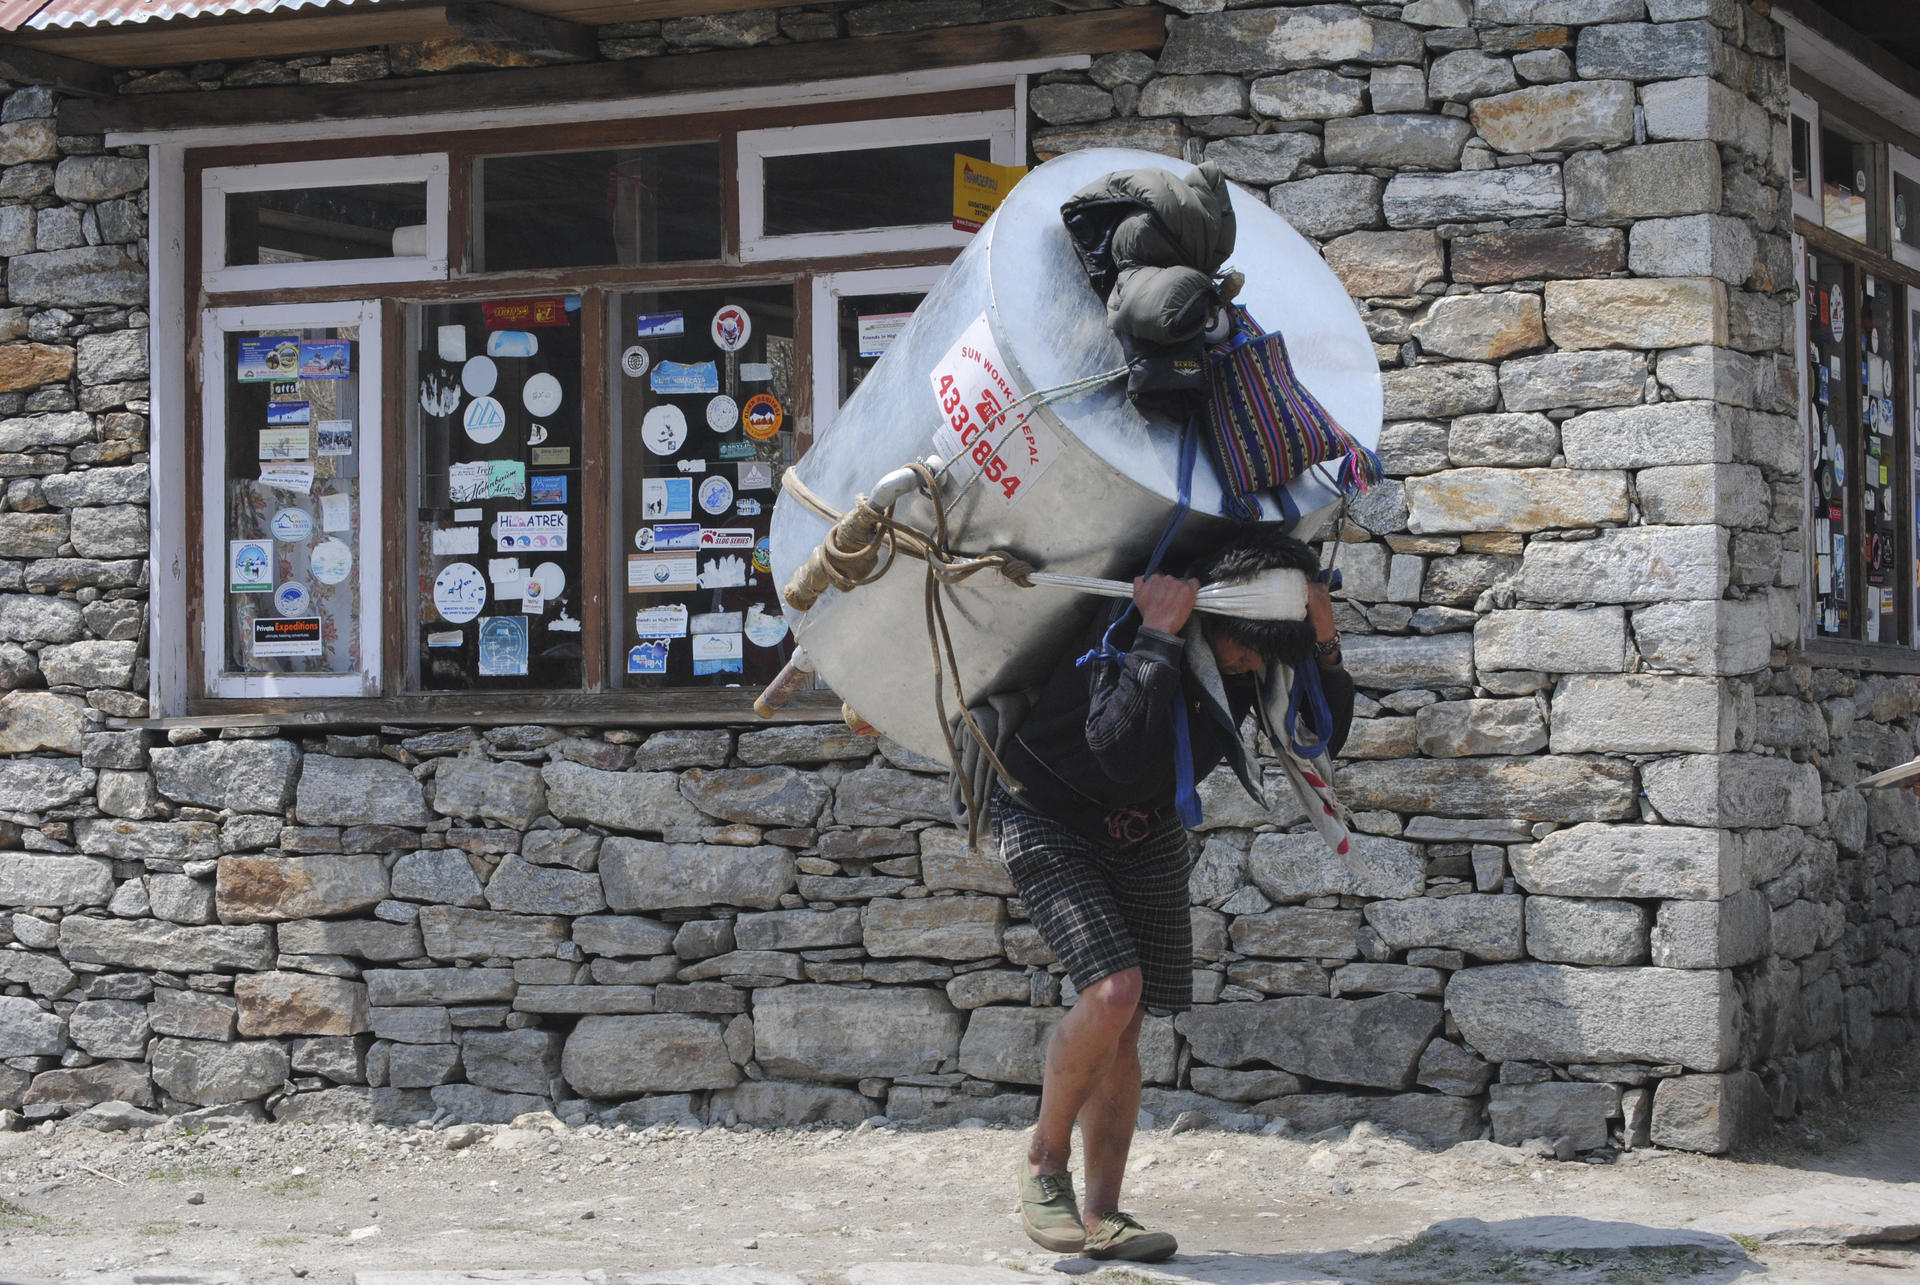 A strong back is a man's greatest asset in the remote valleys of Nepal.